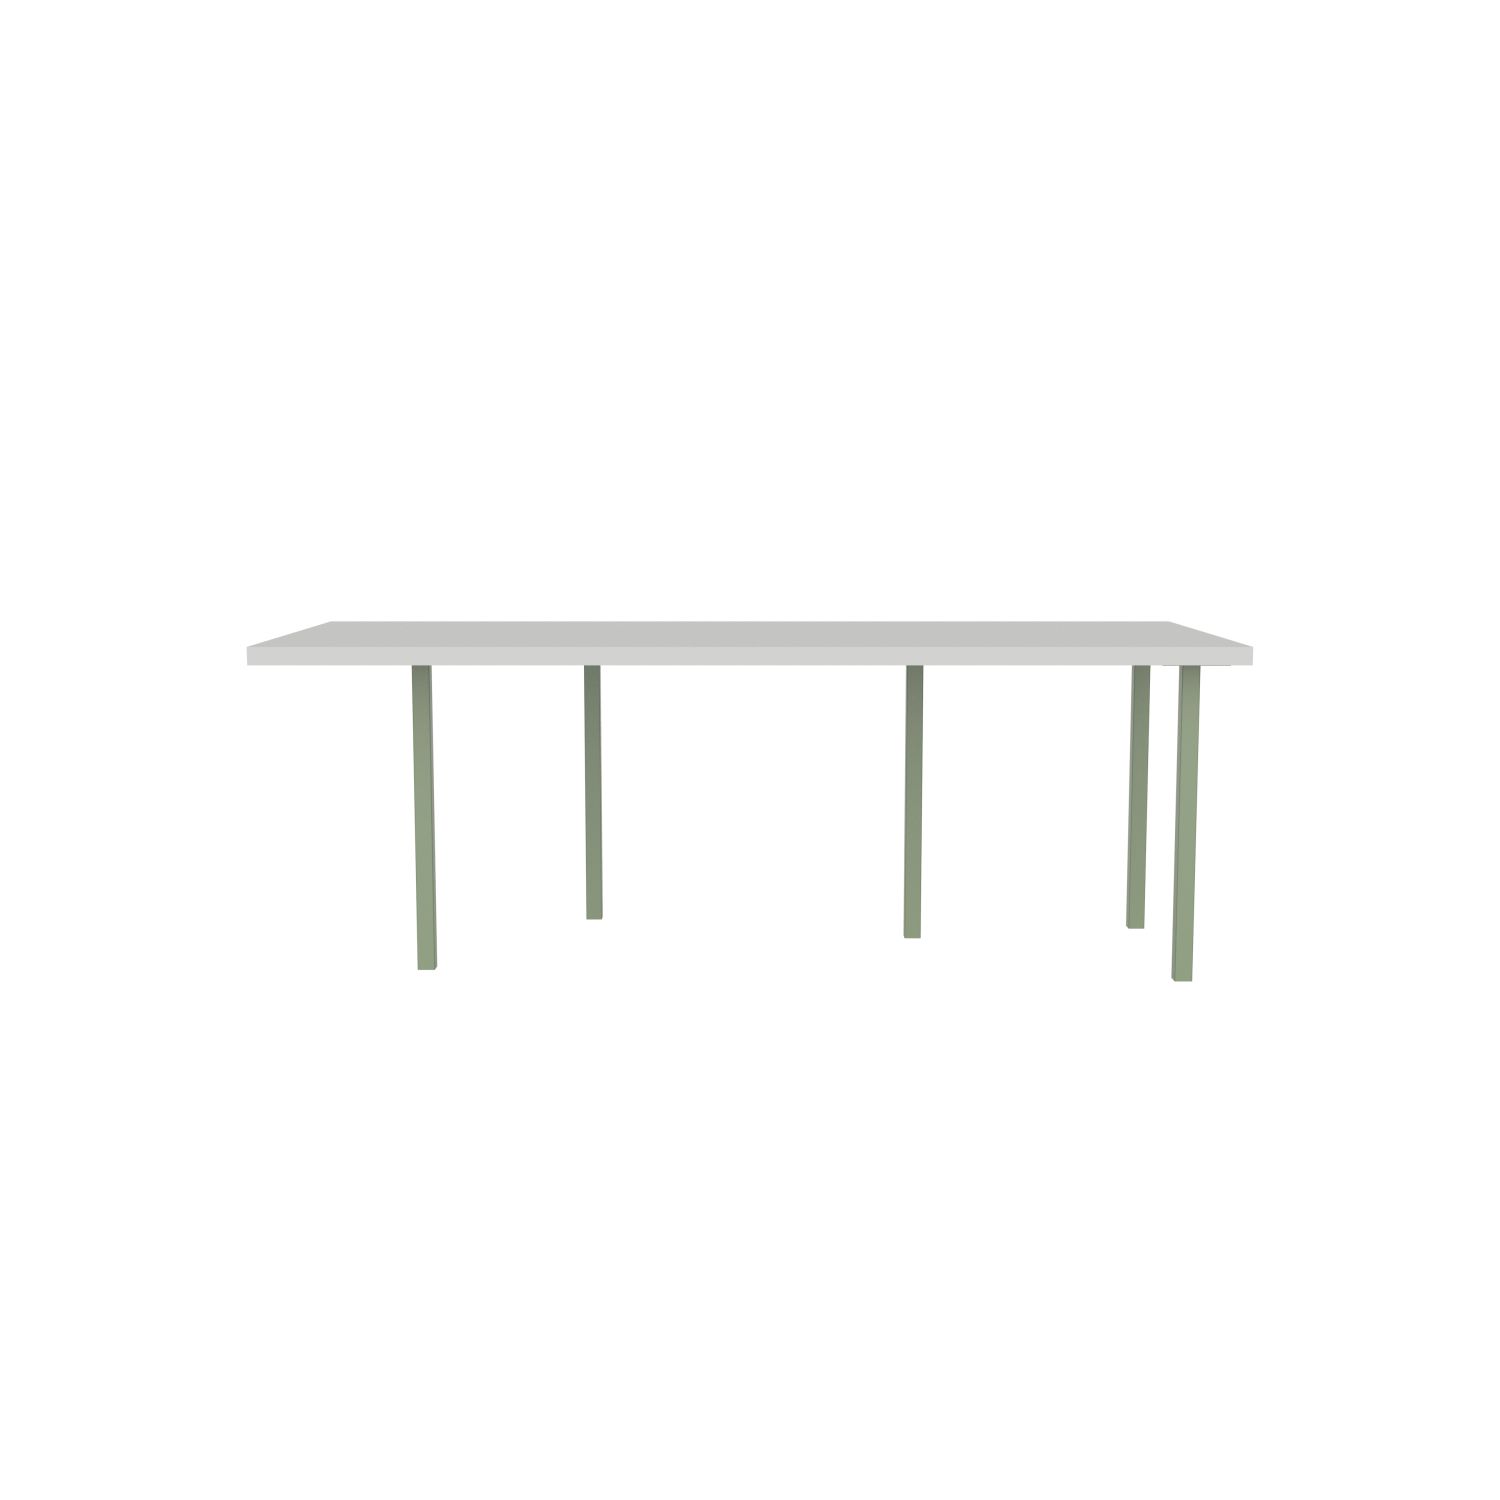 lensvelt bbrand table five fixed heigt 915x218 hpl boring grey 50 mm price level 1 green ral6021